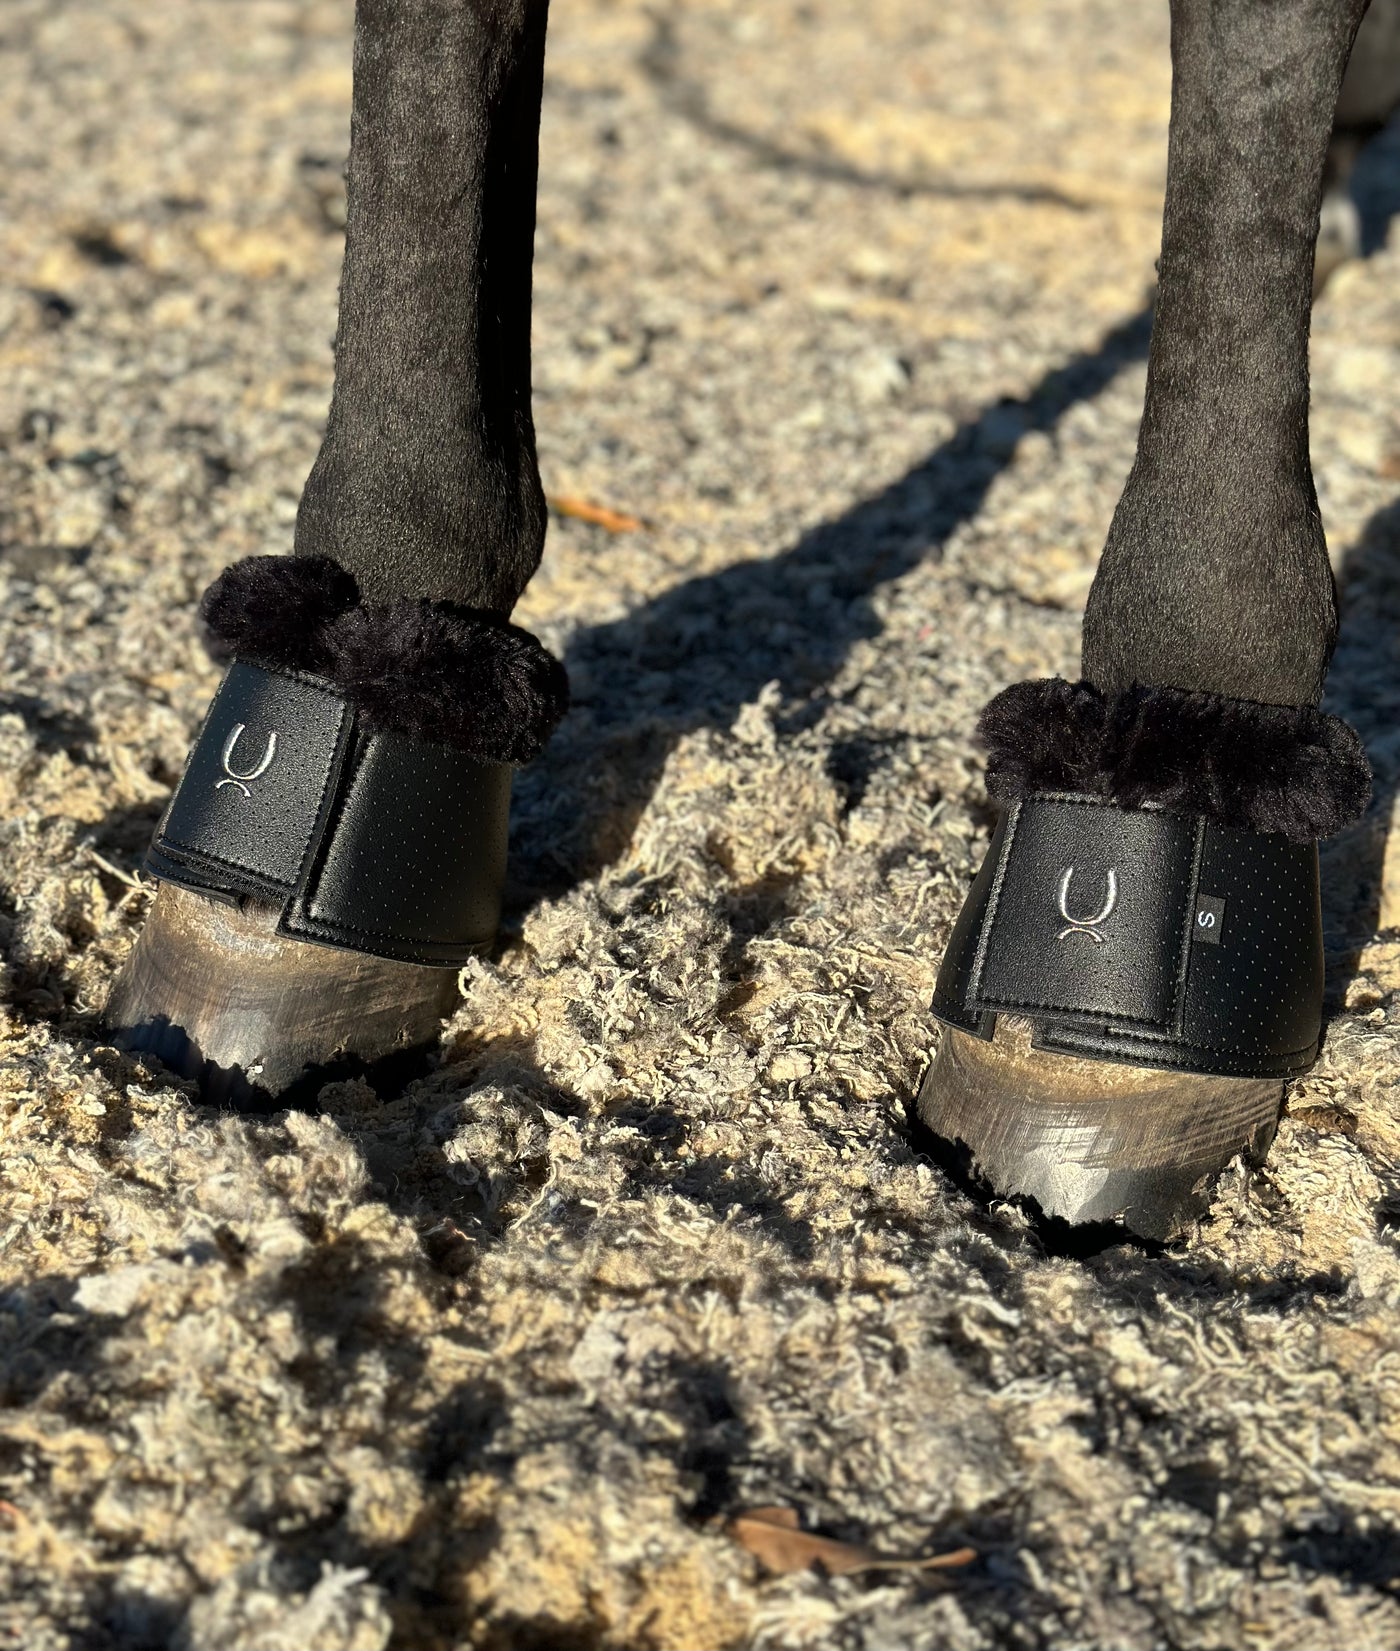 Our classic Liscio bell boots are known for their durability and sleek design. Constructed from only the best materials, these bell boots are sure to provide long-lasting protection for your horse while also looking great.